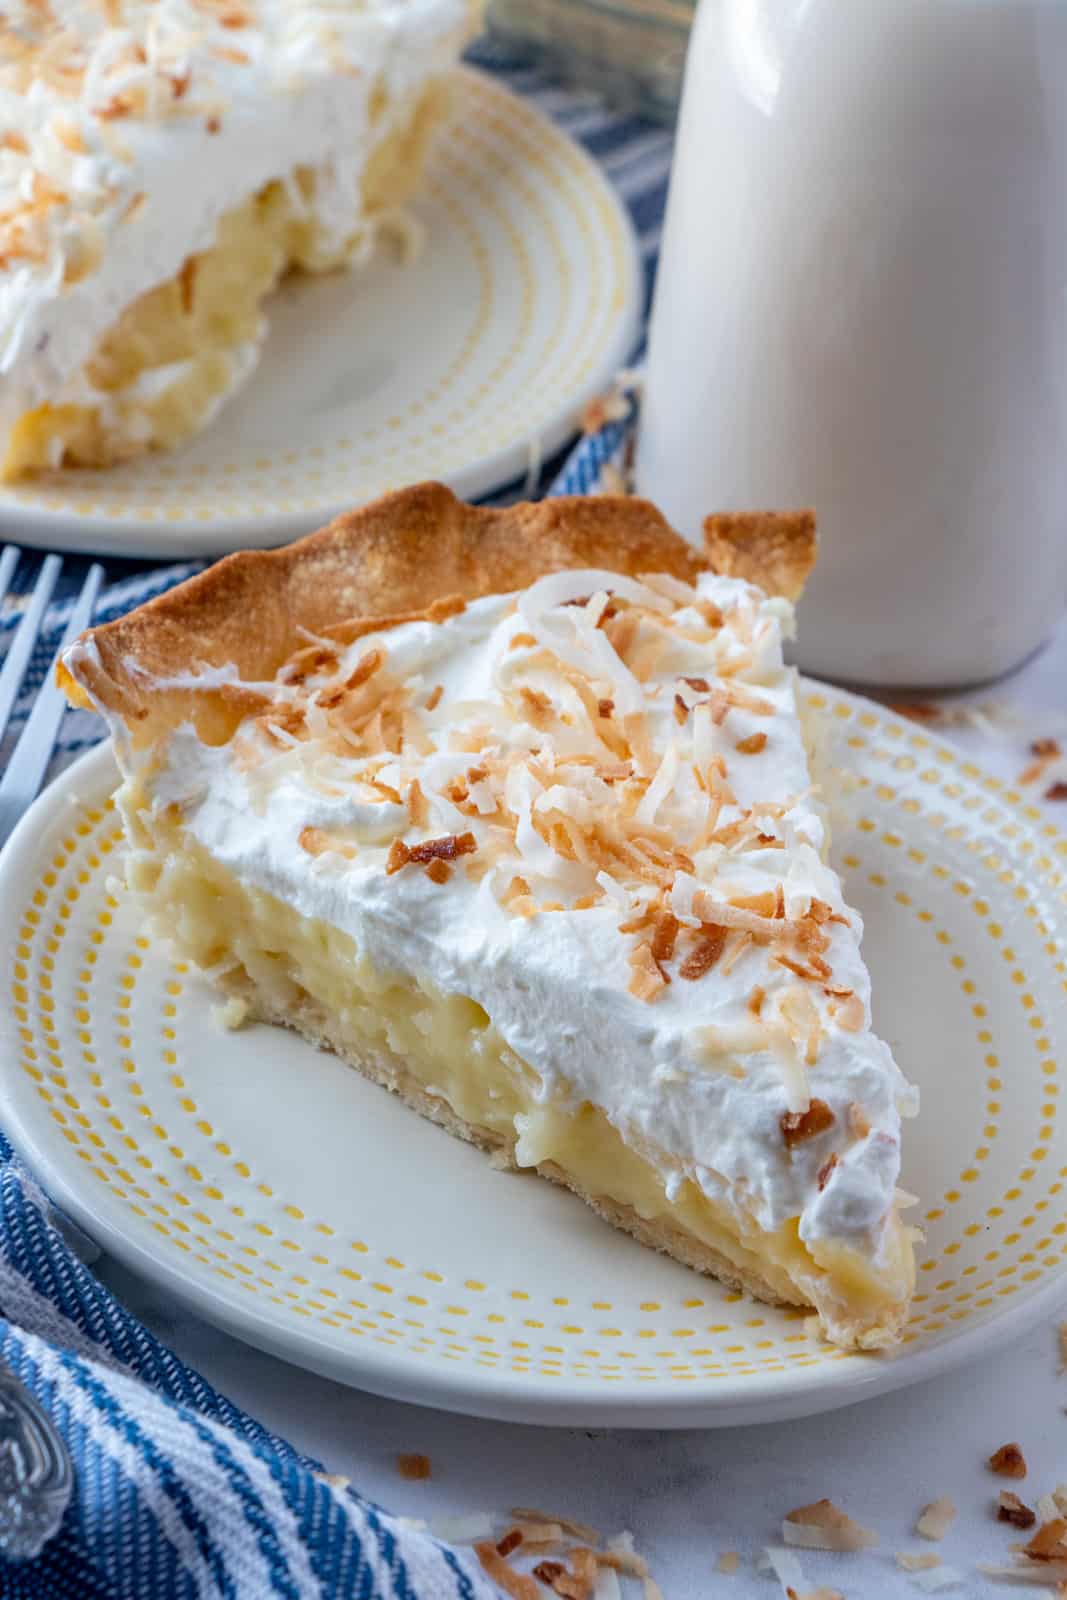 Slice of pie on plate topped with toasted coconut